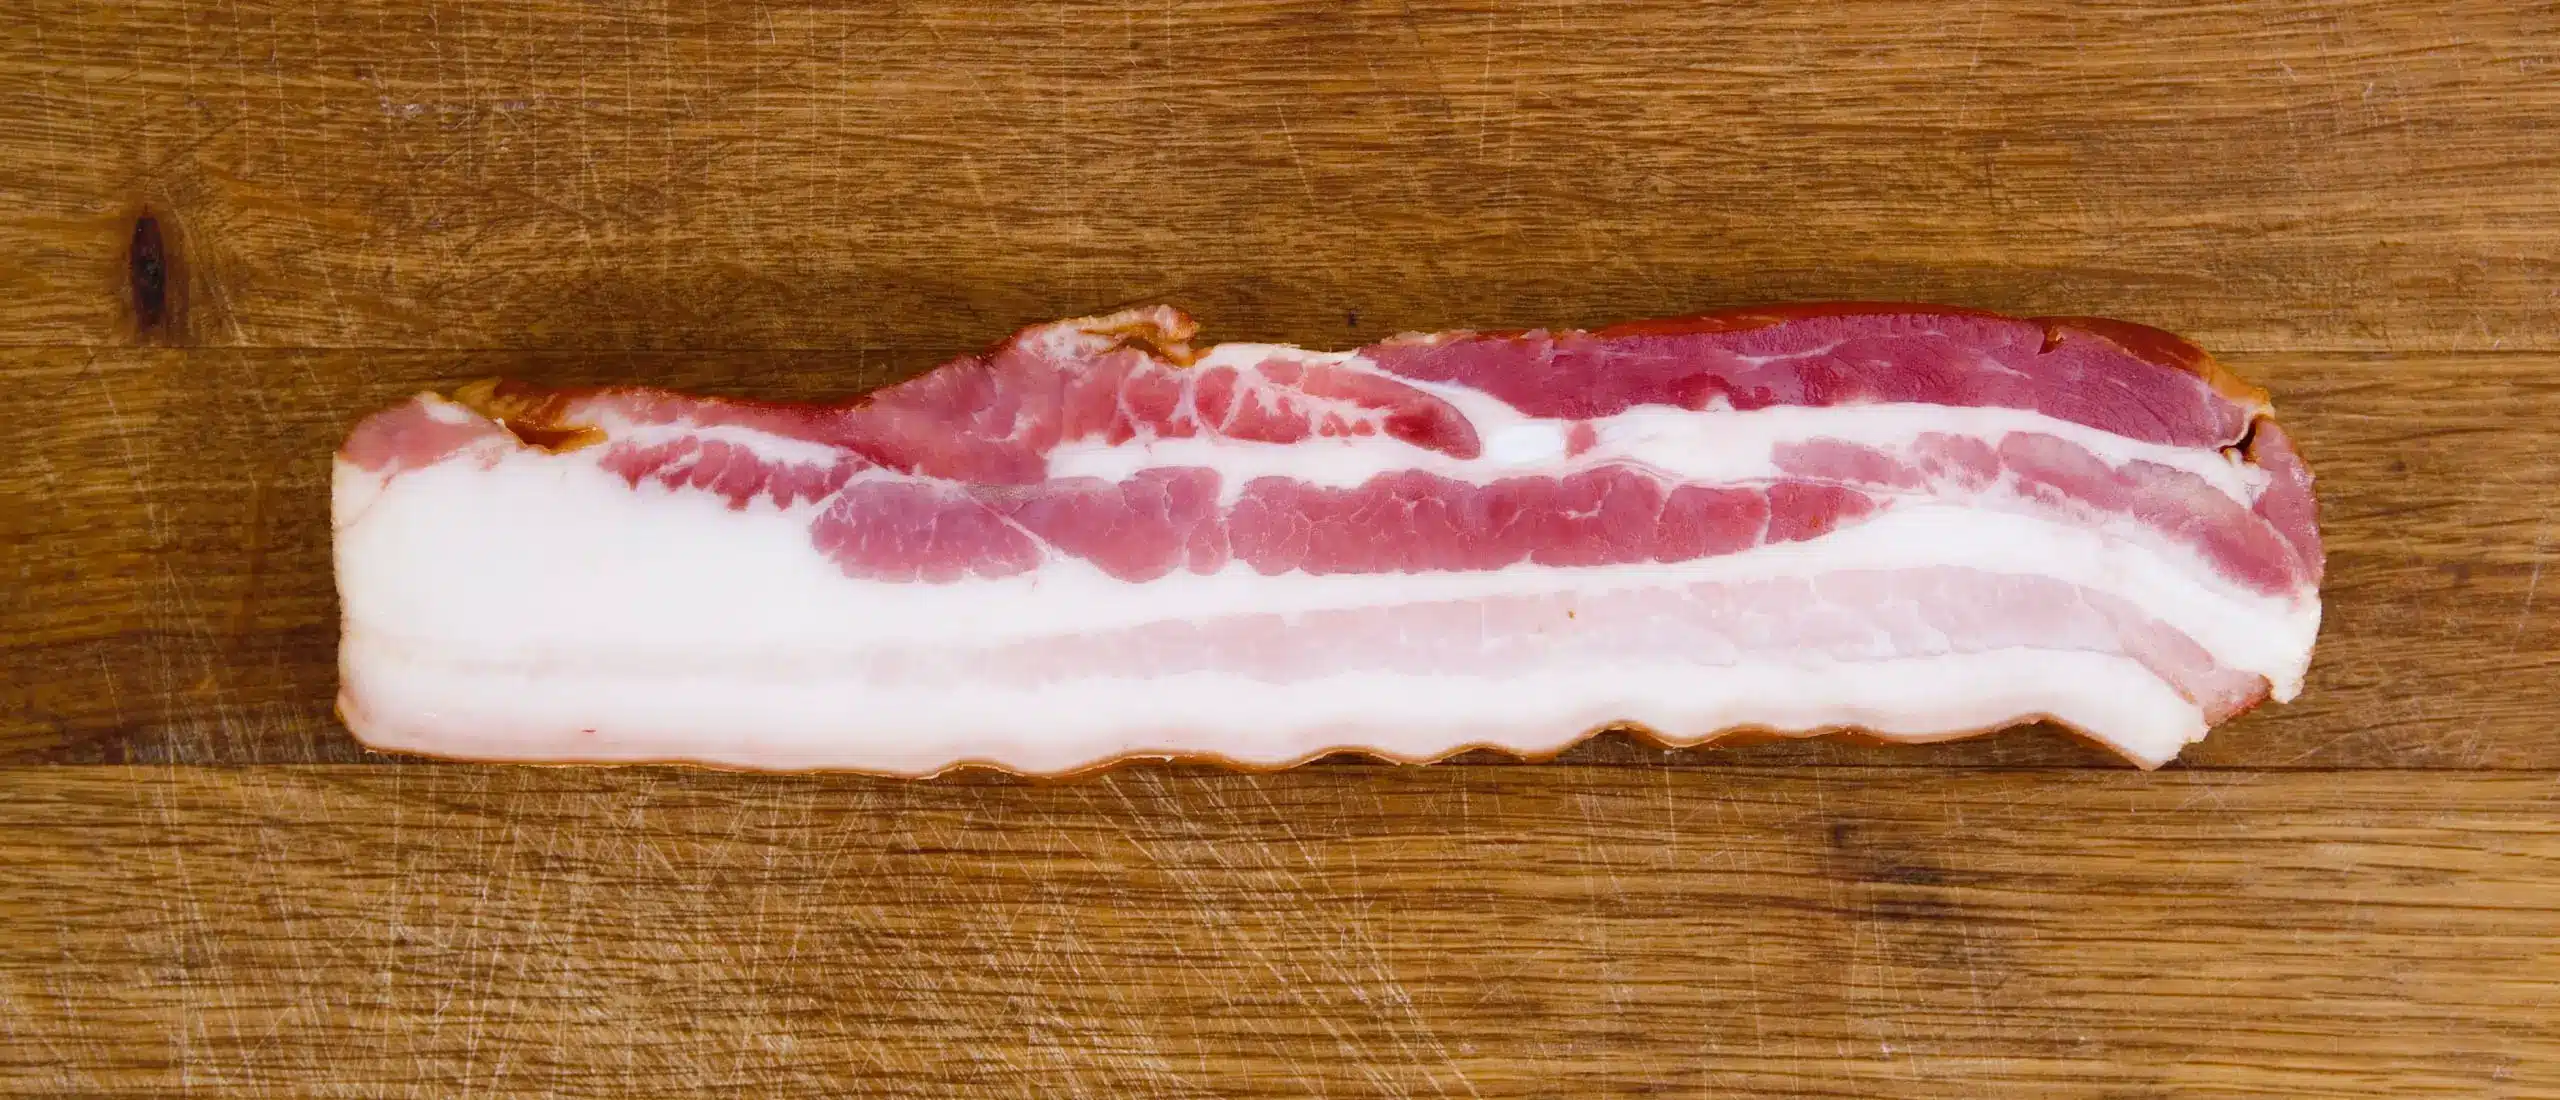 slice of thick fatty bacon on a wooden cutting board